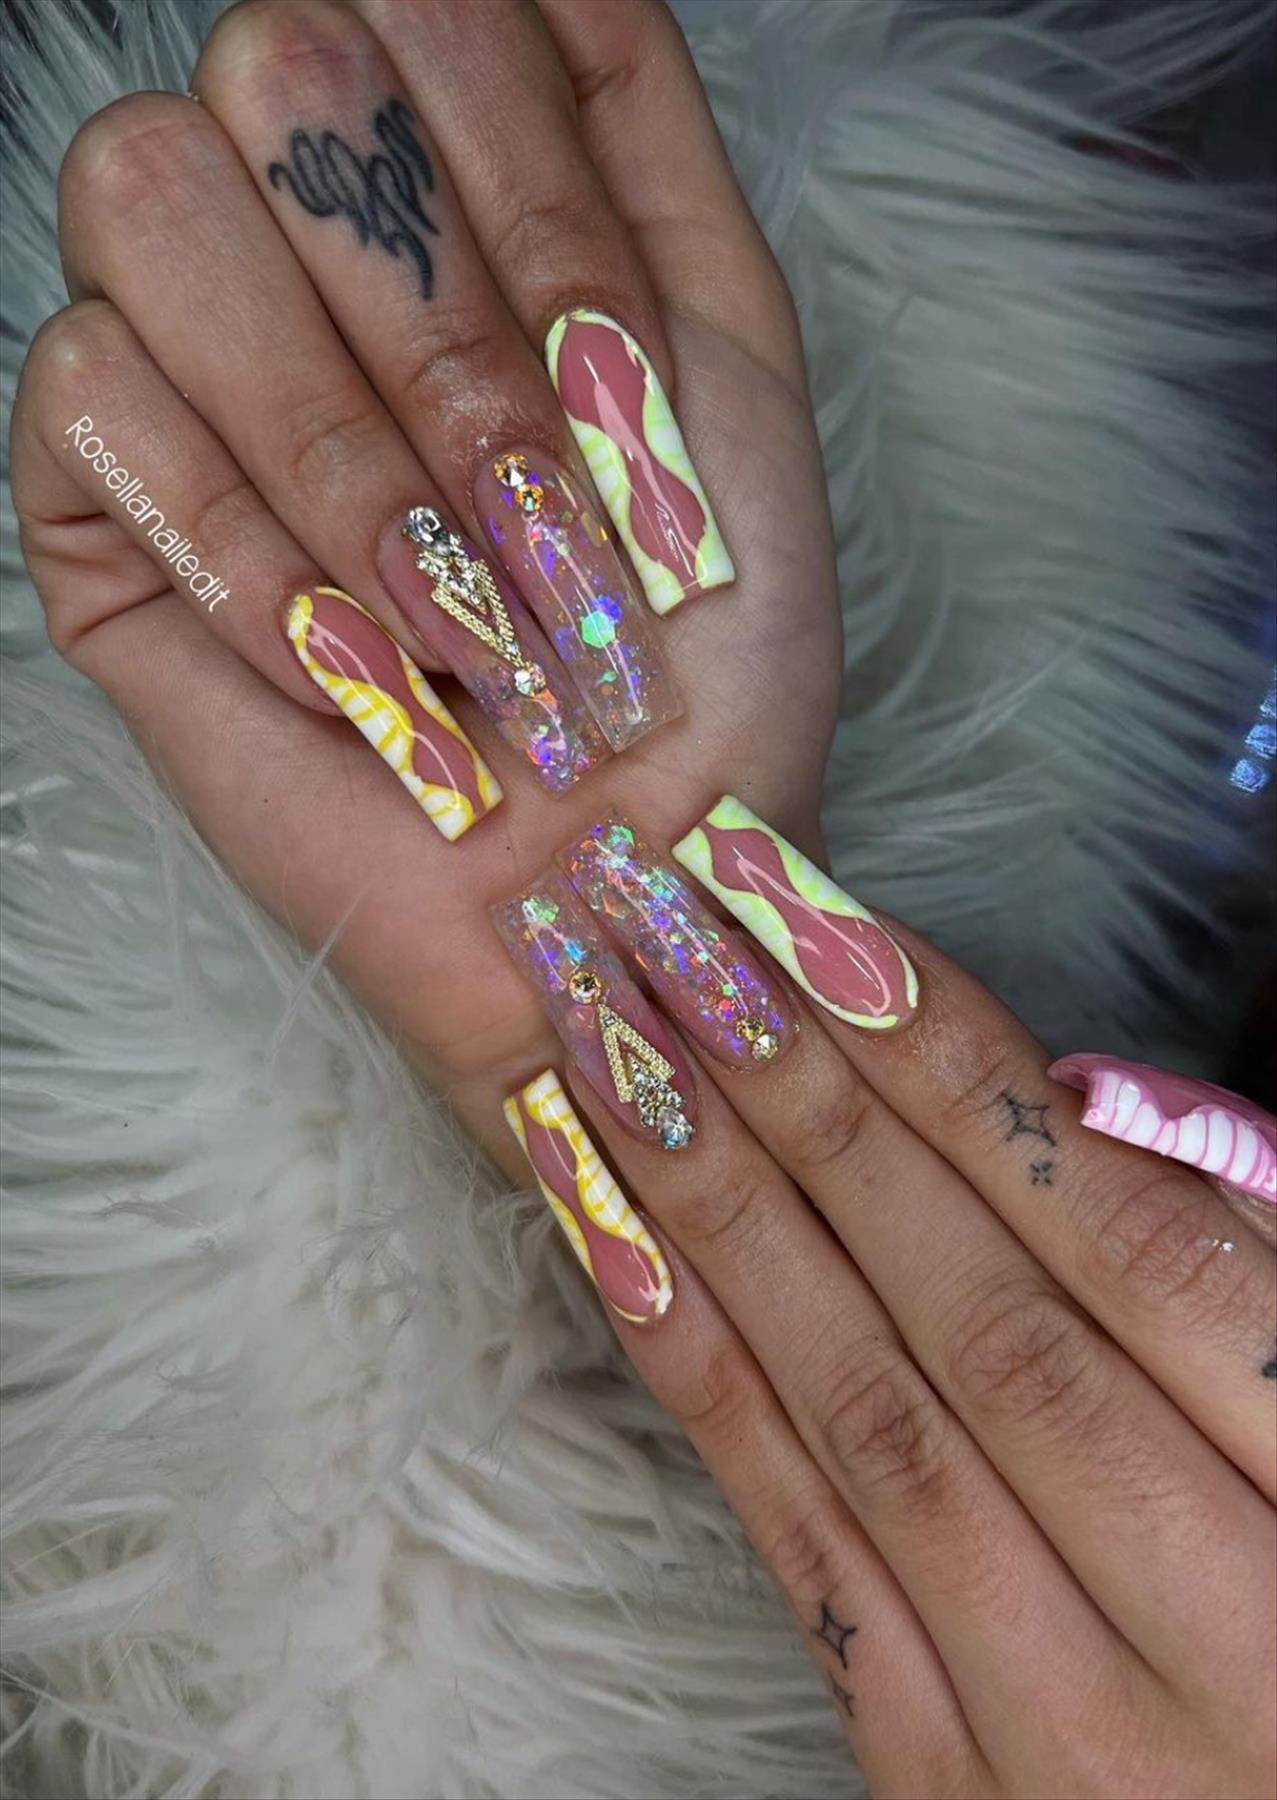 Best acrylic coffin nails that popular on any occasion